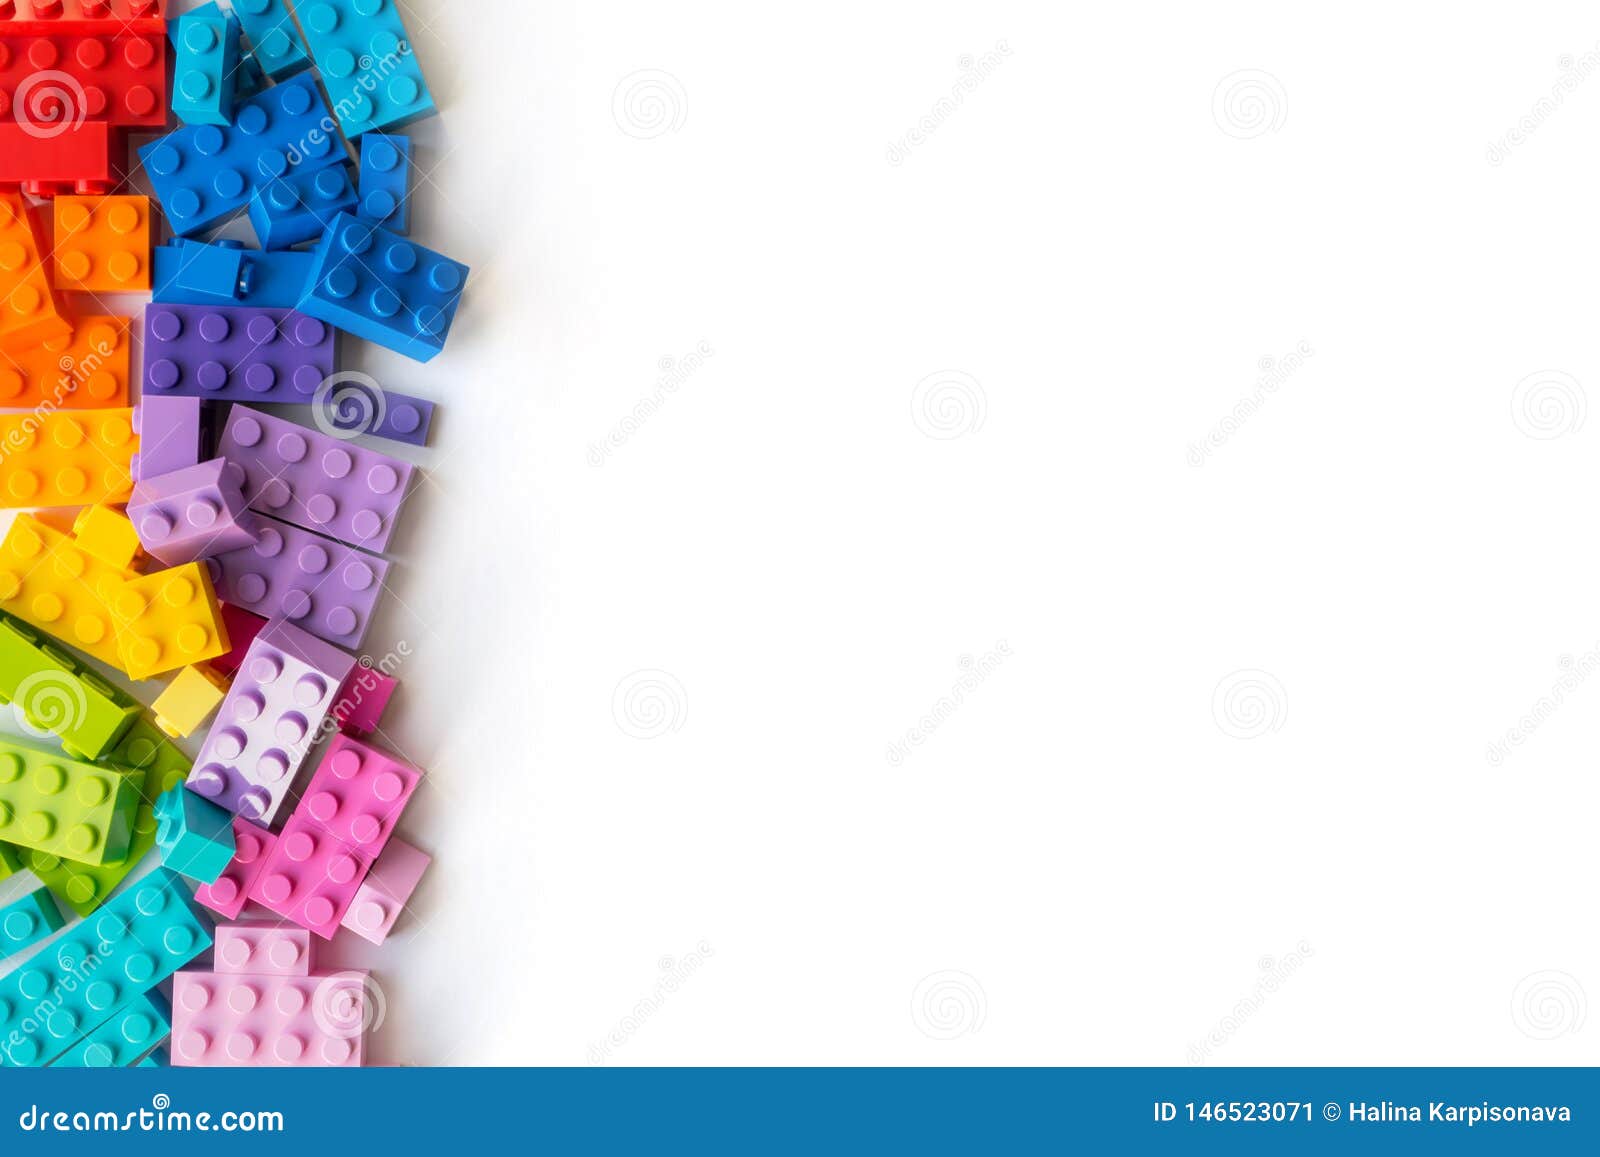 lego bricks background. a lot of colorful plastick constructor bricks on white background. popular toys. copyspace